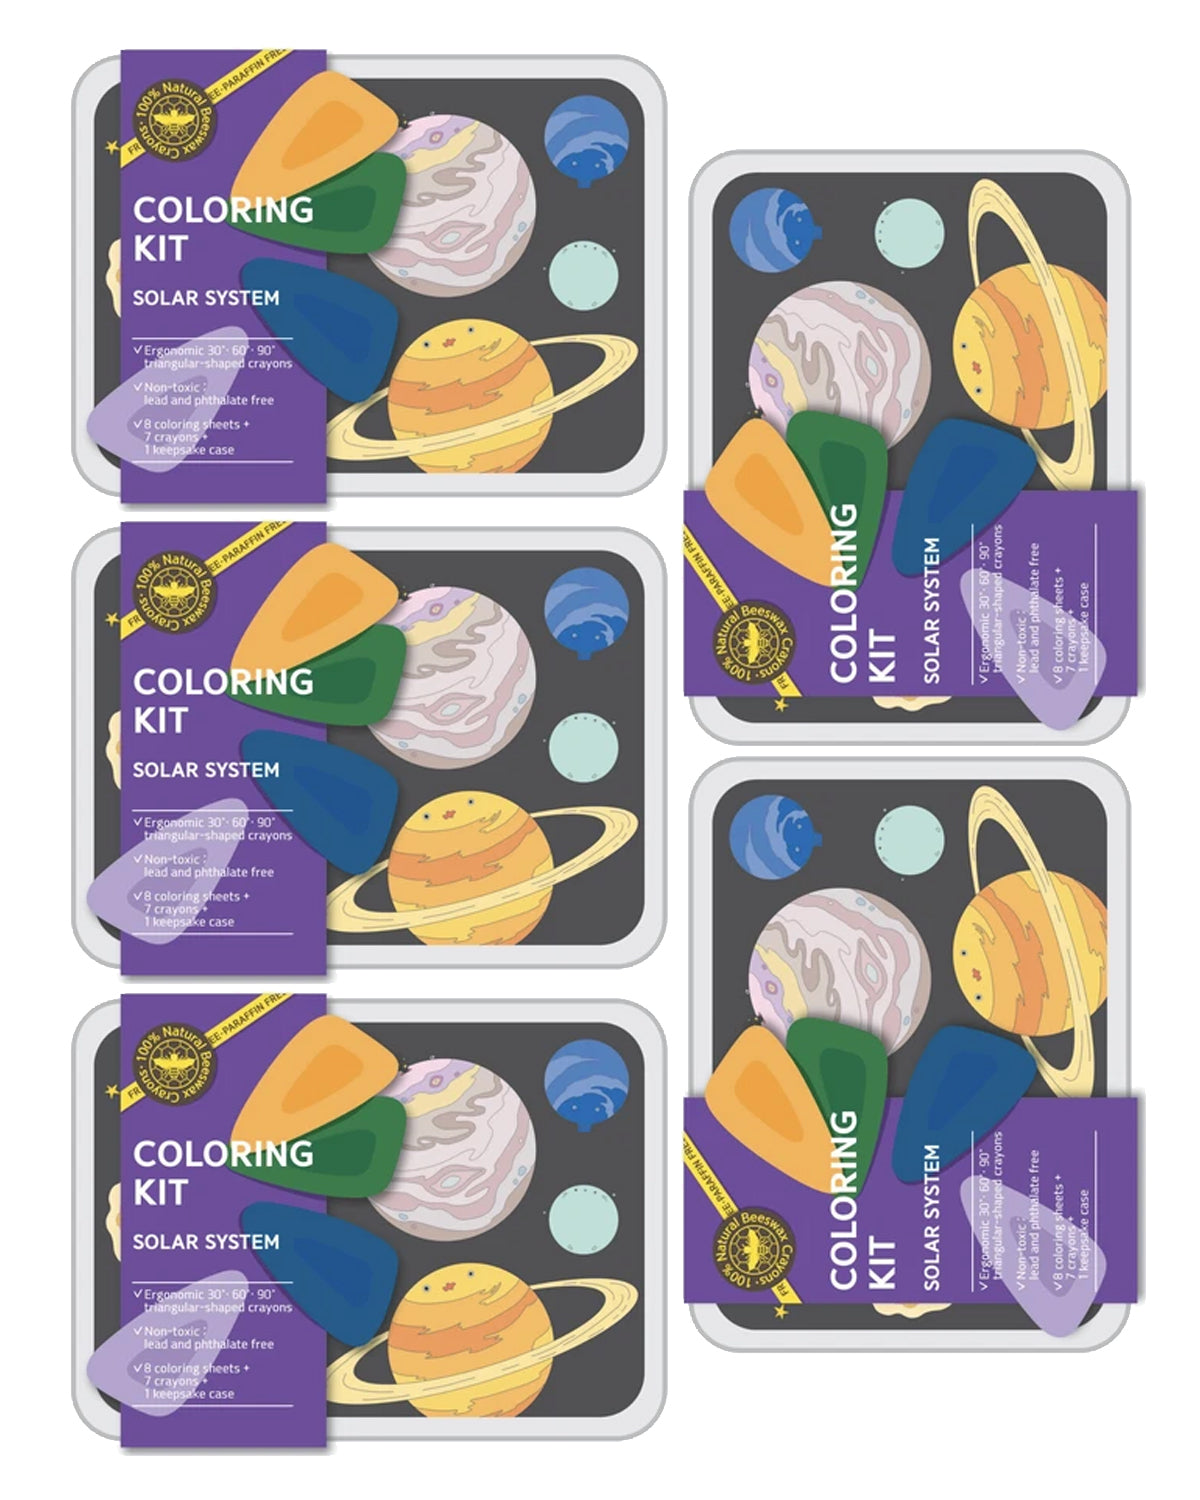 Color Jeu Coloring Kit - 5 units in set - SOLAR SYSTEM Small